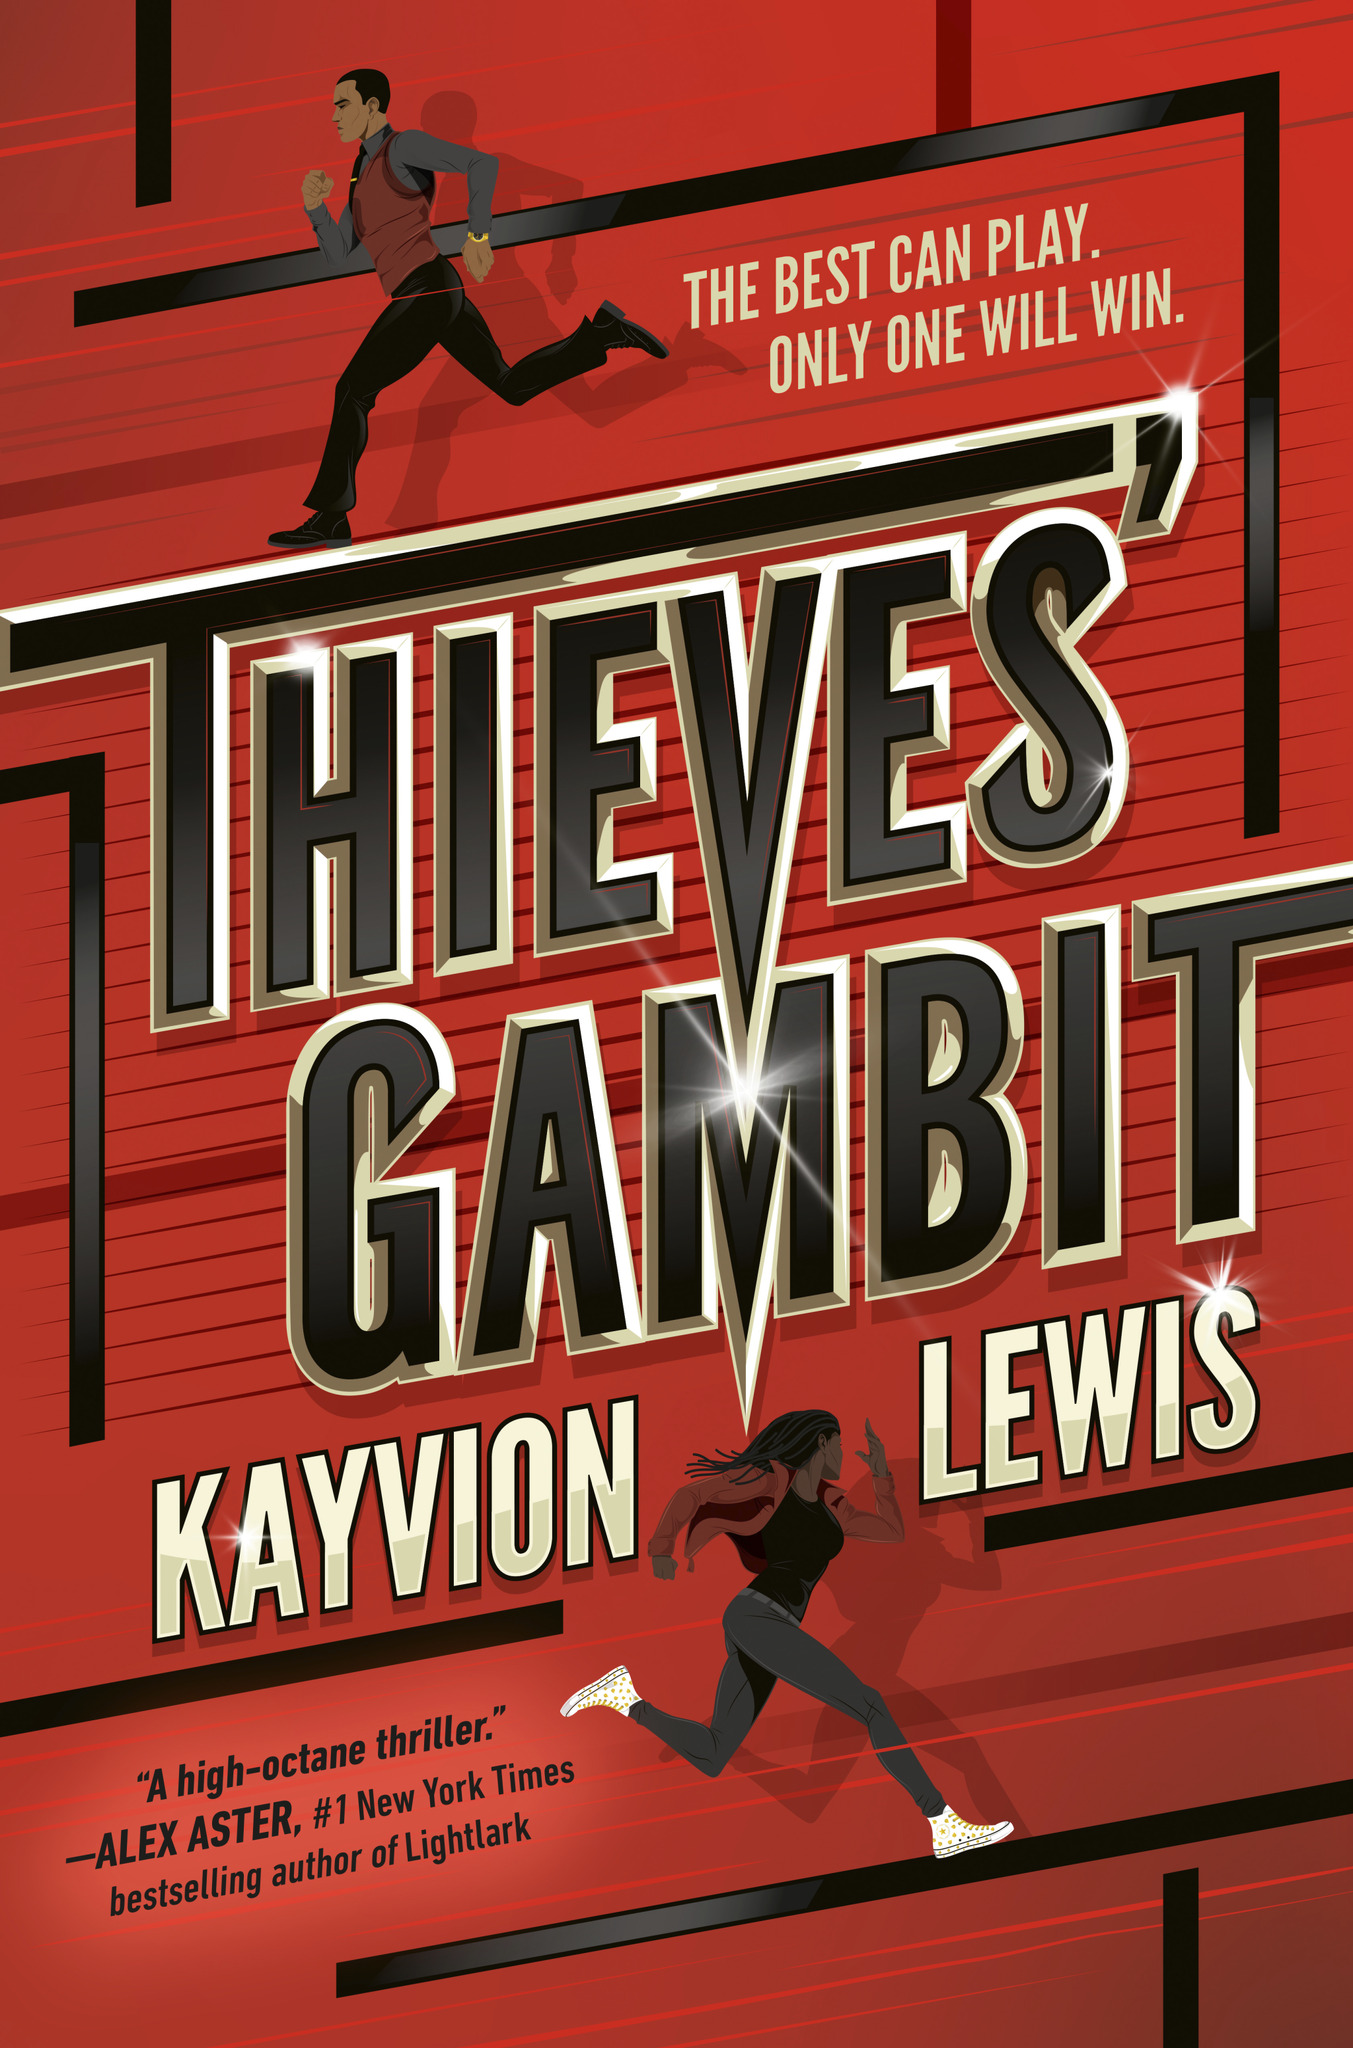 Inspiring Reality Through Fiction, a guest post by THIEVES’ GAMBIT author Kayvion Lewis